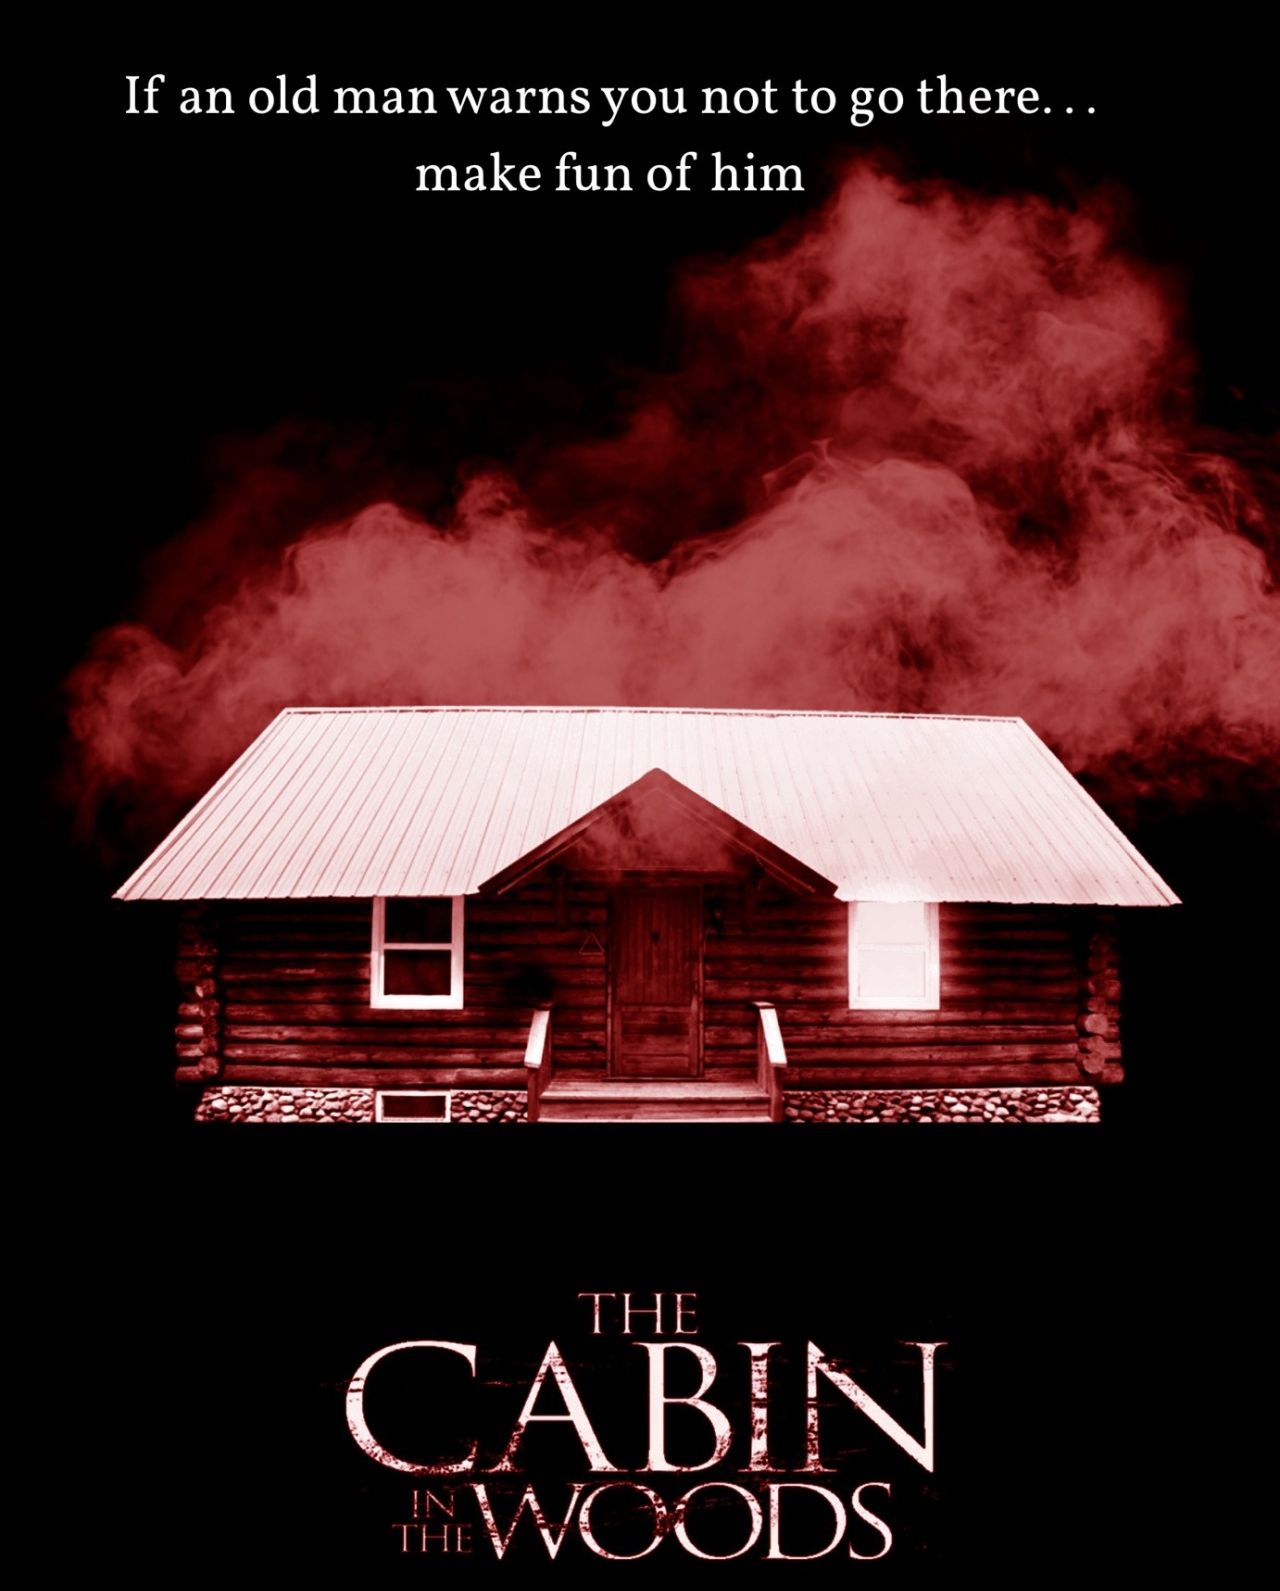 If An Old Man Warns You Not To Go There, Do Not Go There – ‘The Cabin in the Woods’